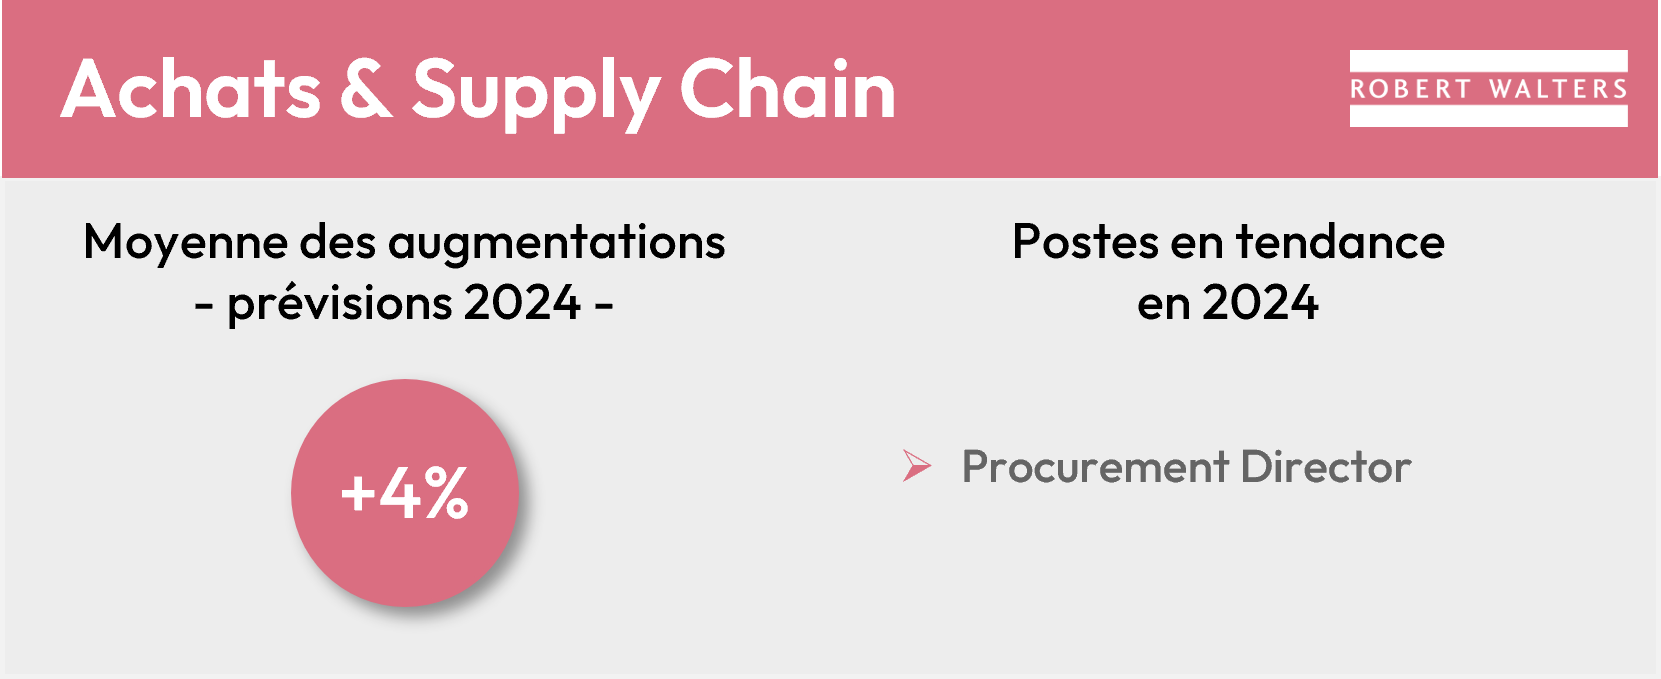 Achats & Supply Chain.png